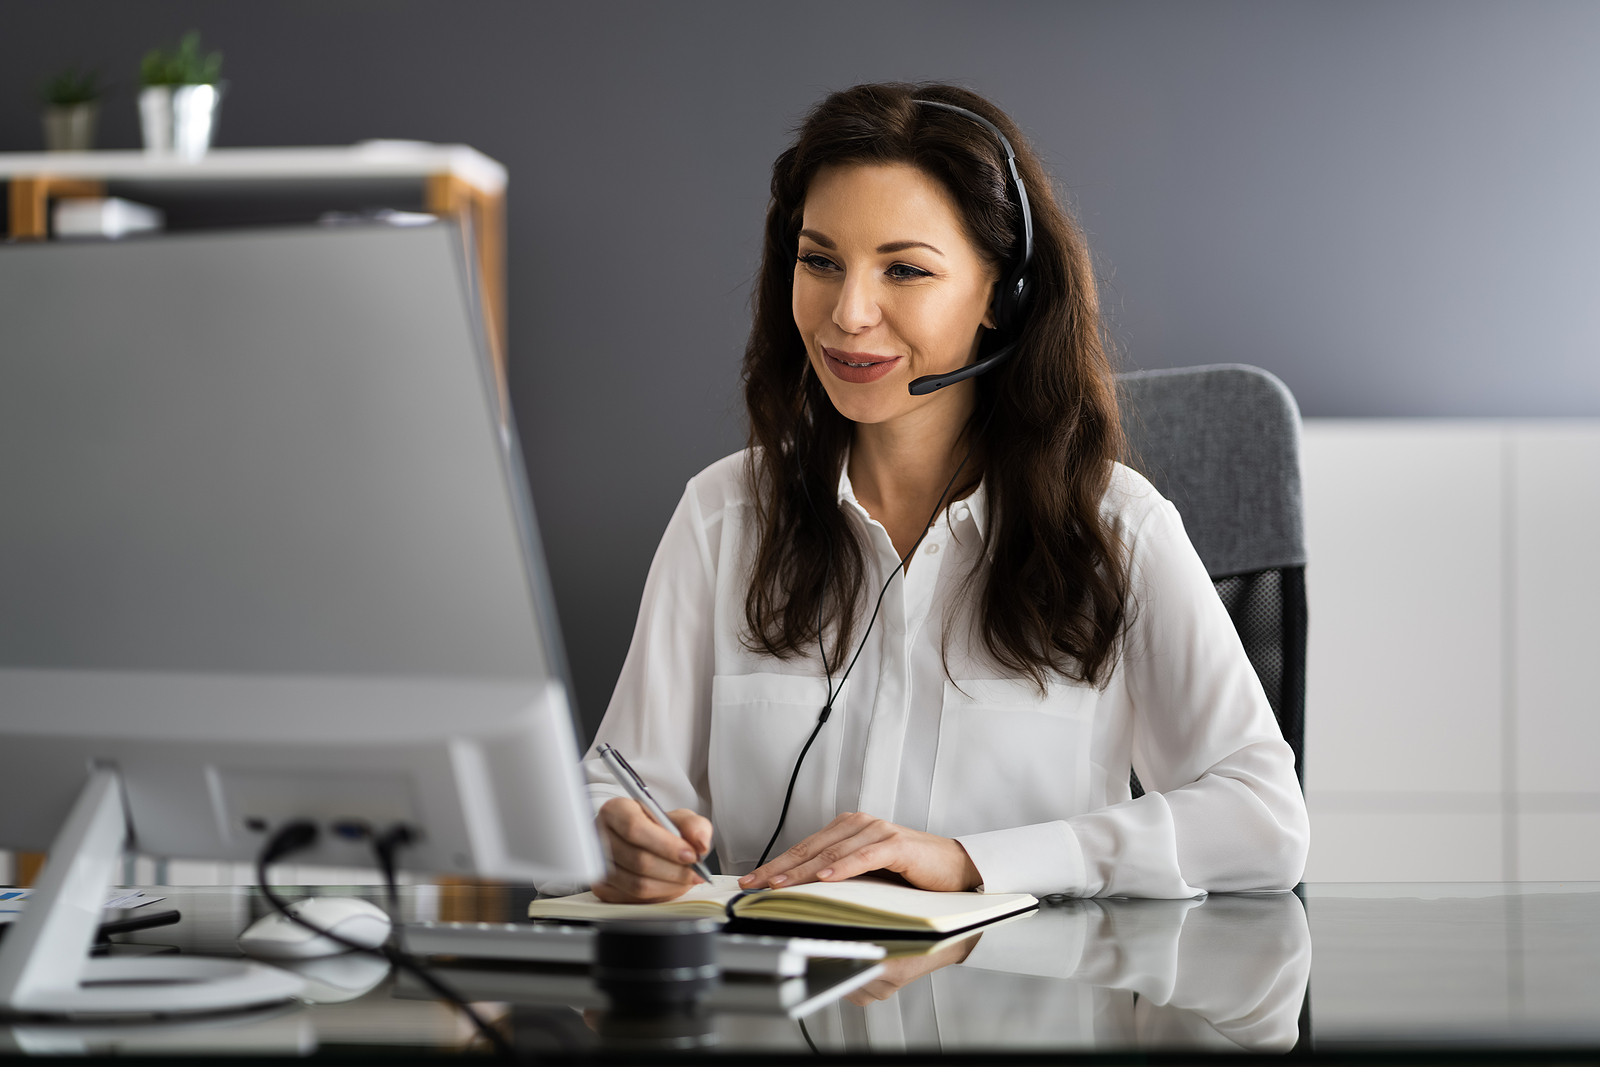 What Are the Benefits of Virtual Assistant Office Support?